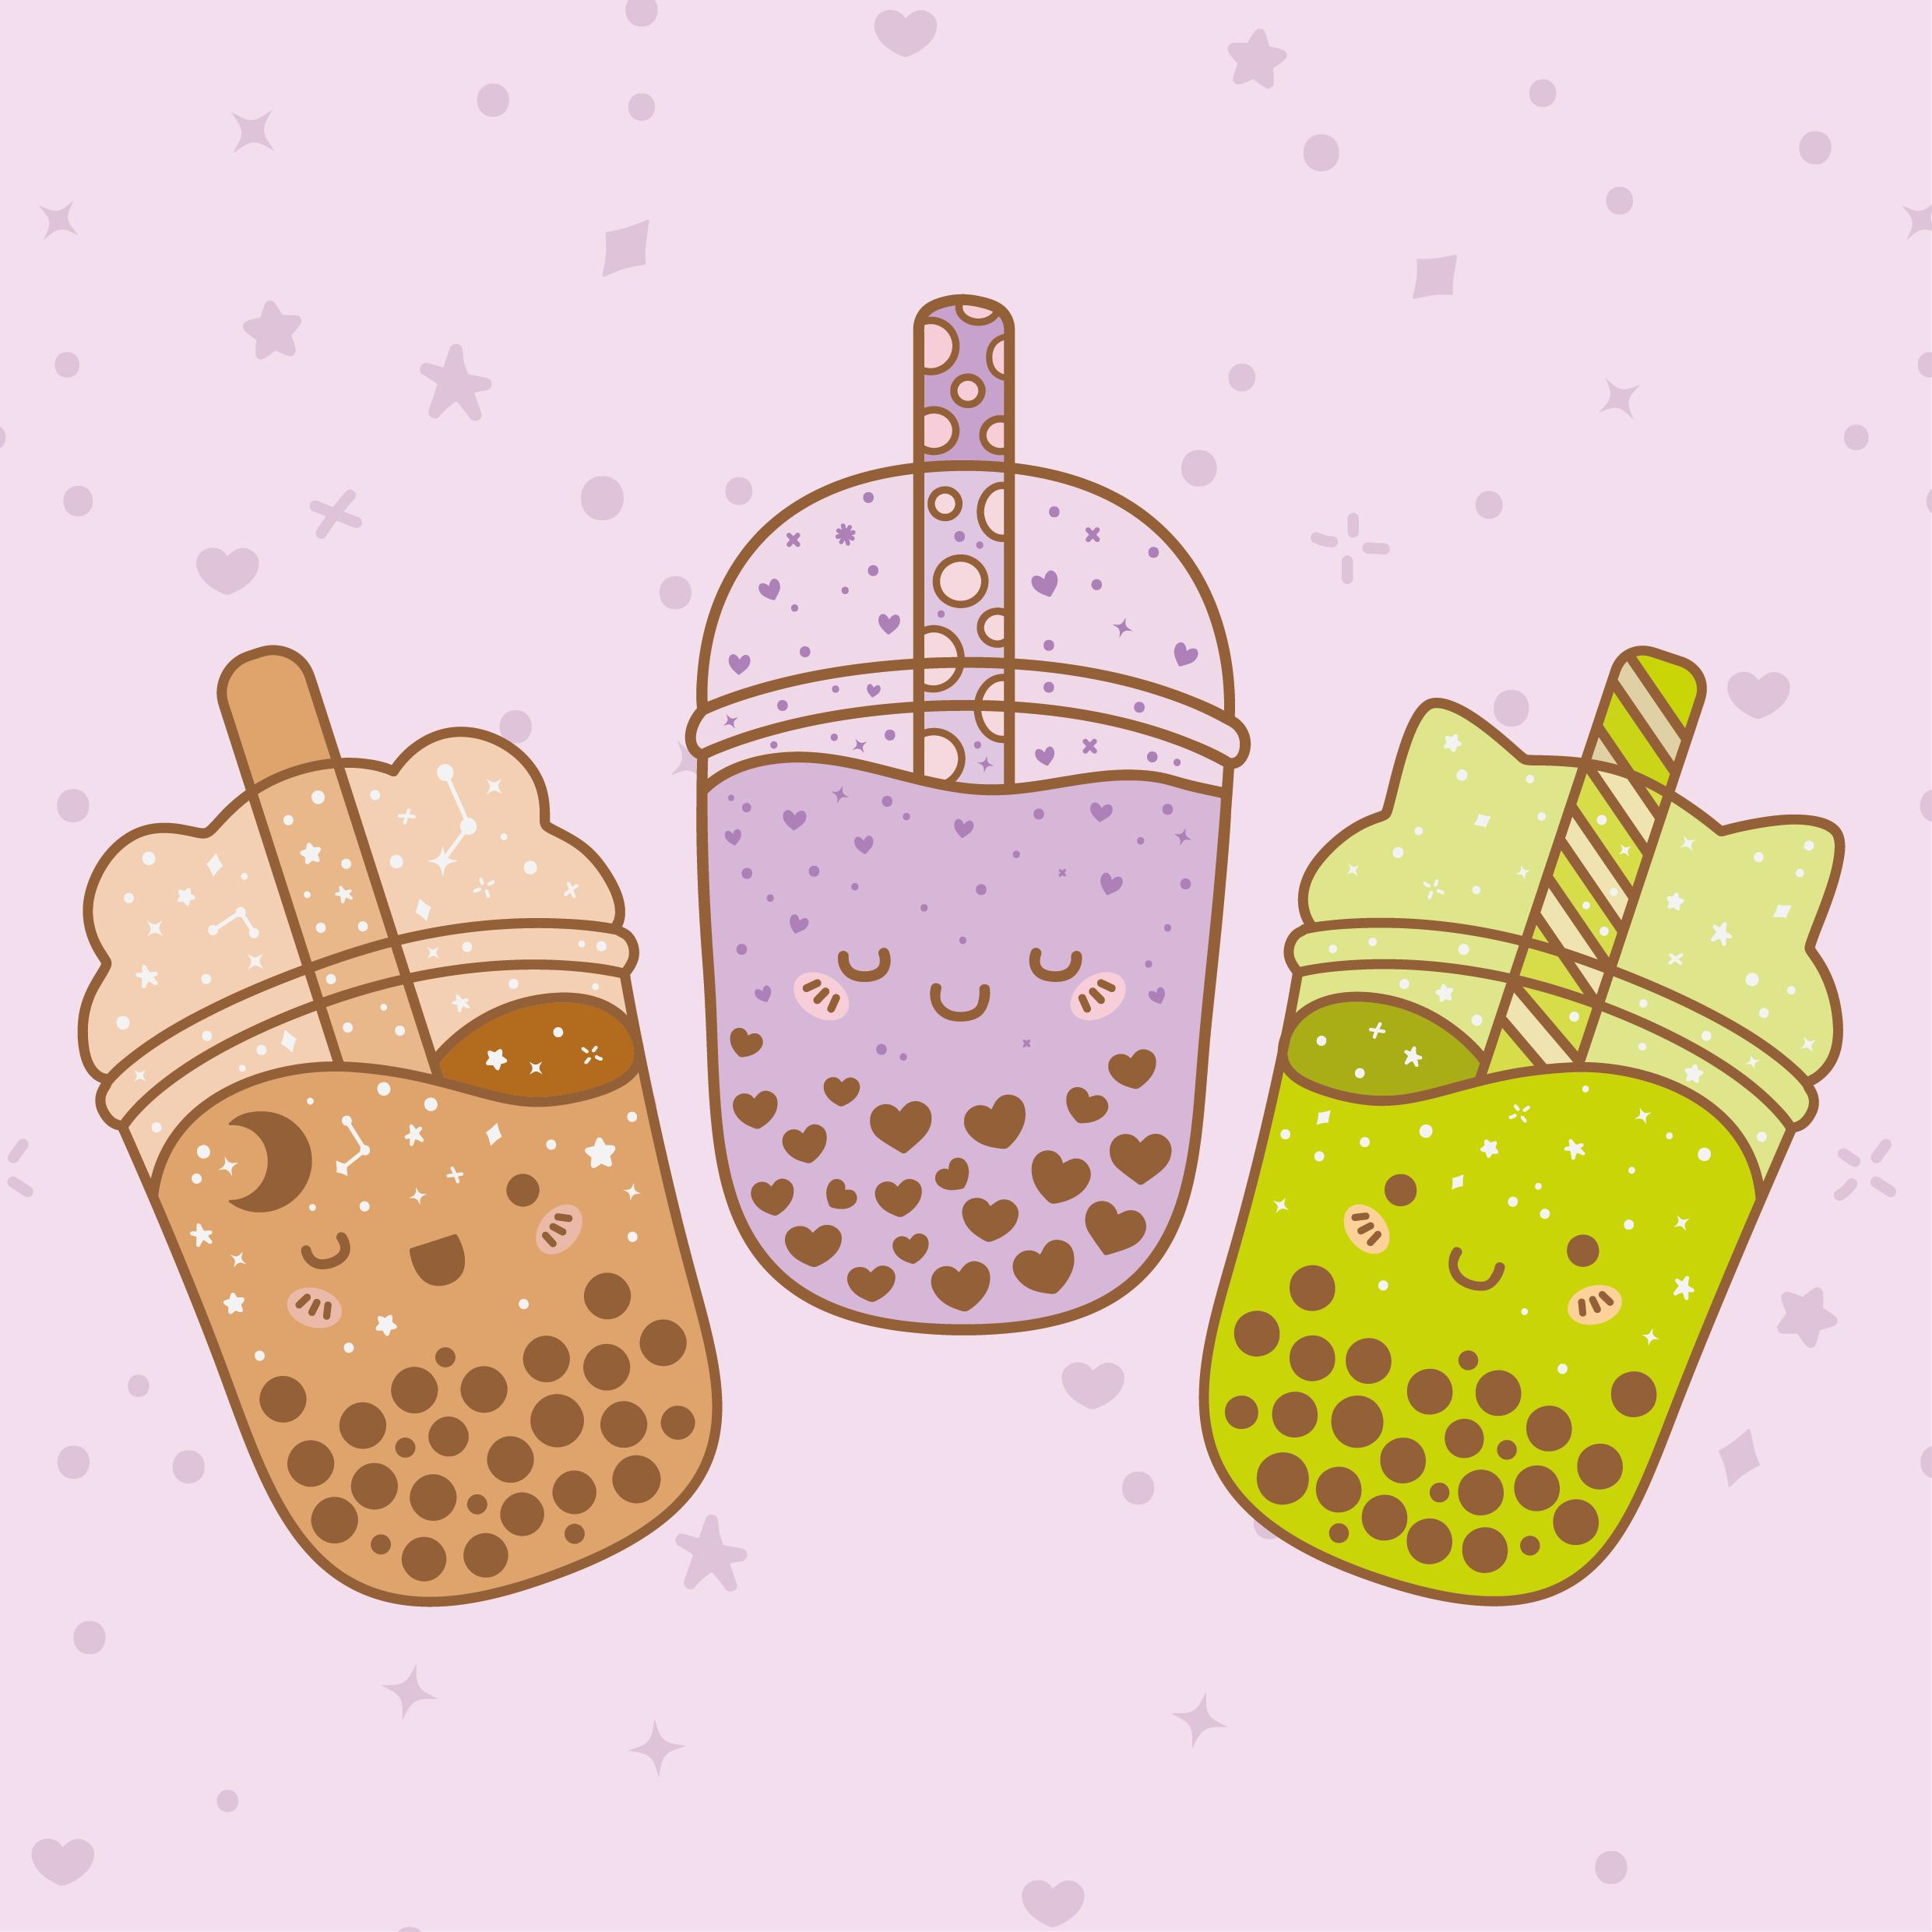 Less than 24 hours to get yourself some cute bubble tea set on Kickstarter✨